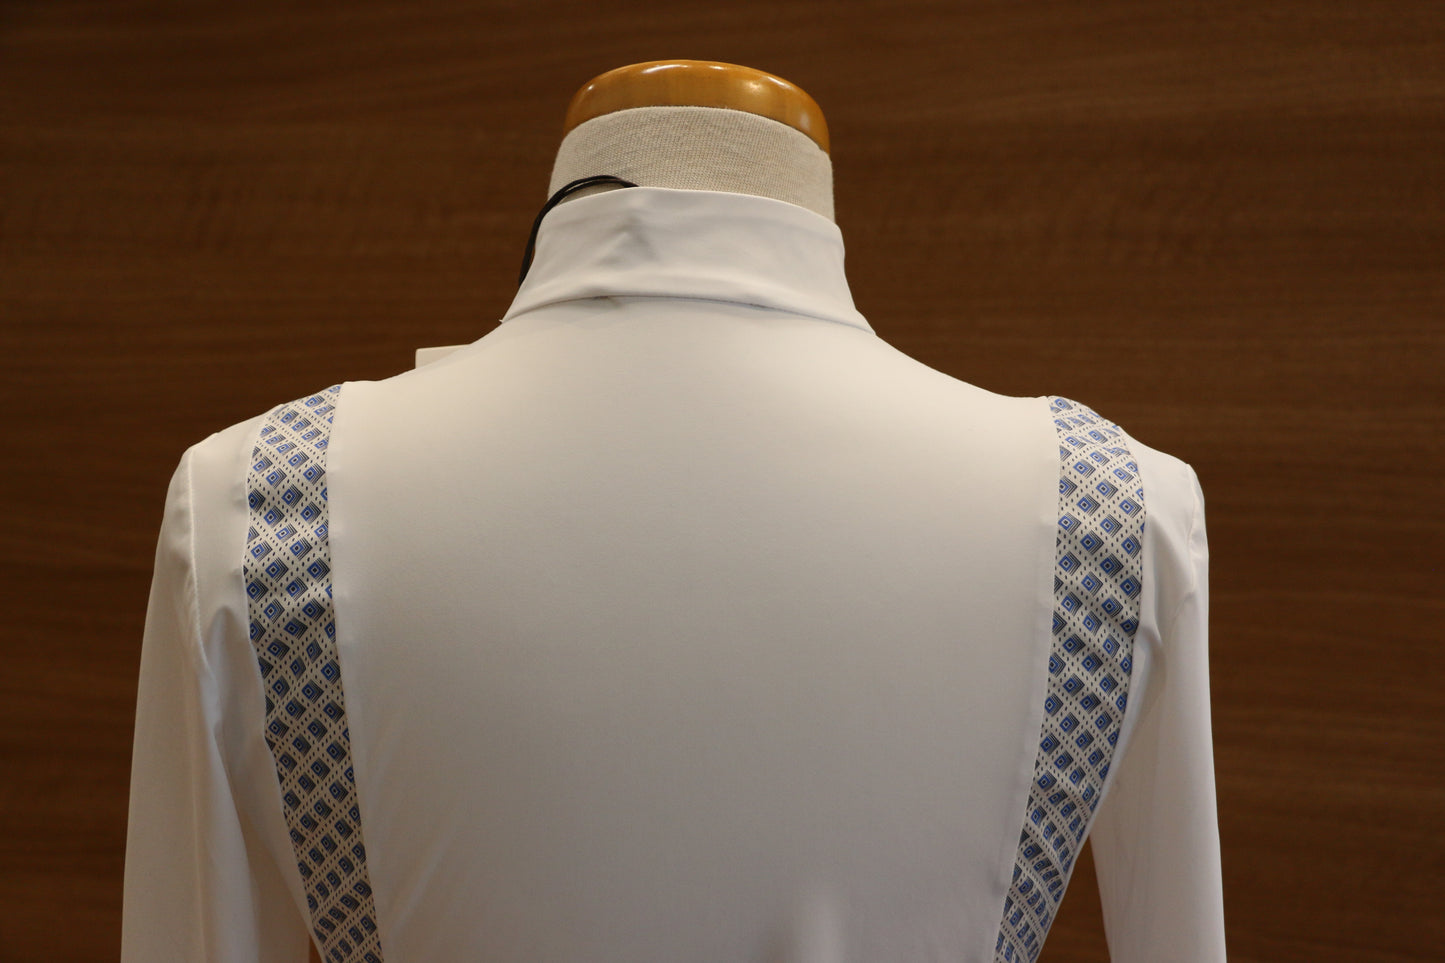 LAGUSO COMPETITION SHIRT - JACKY 'LITTLE SQUARE'